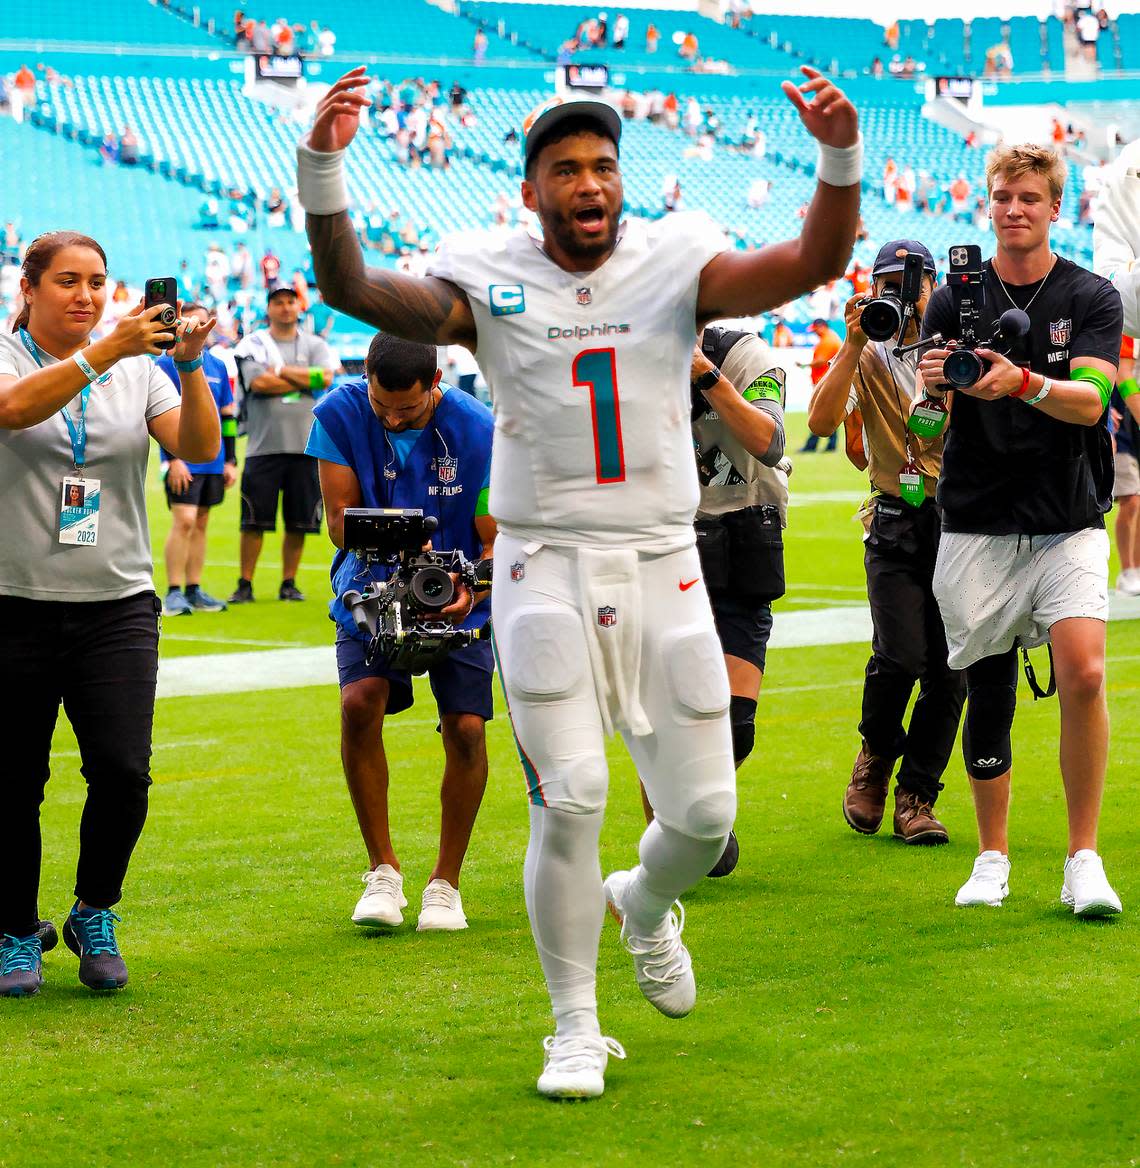 Miami Dolphins quarterback Tua Tagovailoa (1) celebrates after the Dolphins defeated the Denver Broncos 70-20 during an NFL football game at Hard Rock Stadium on Sunday, Sept. 24, 2023 in Miami Gardens, Fl.